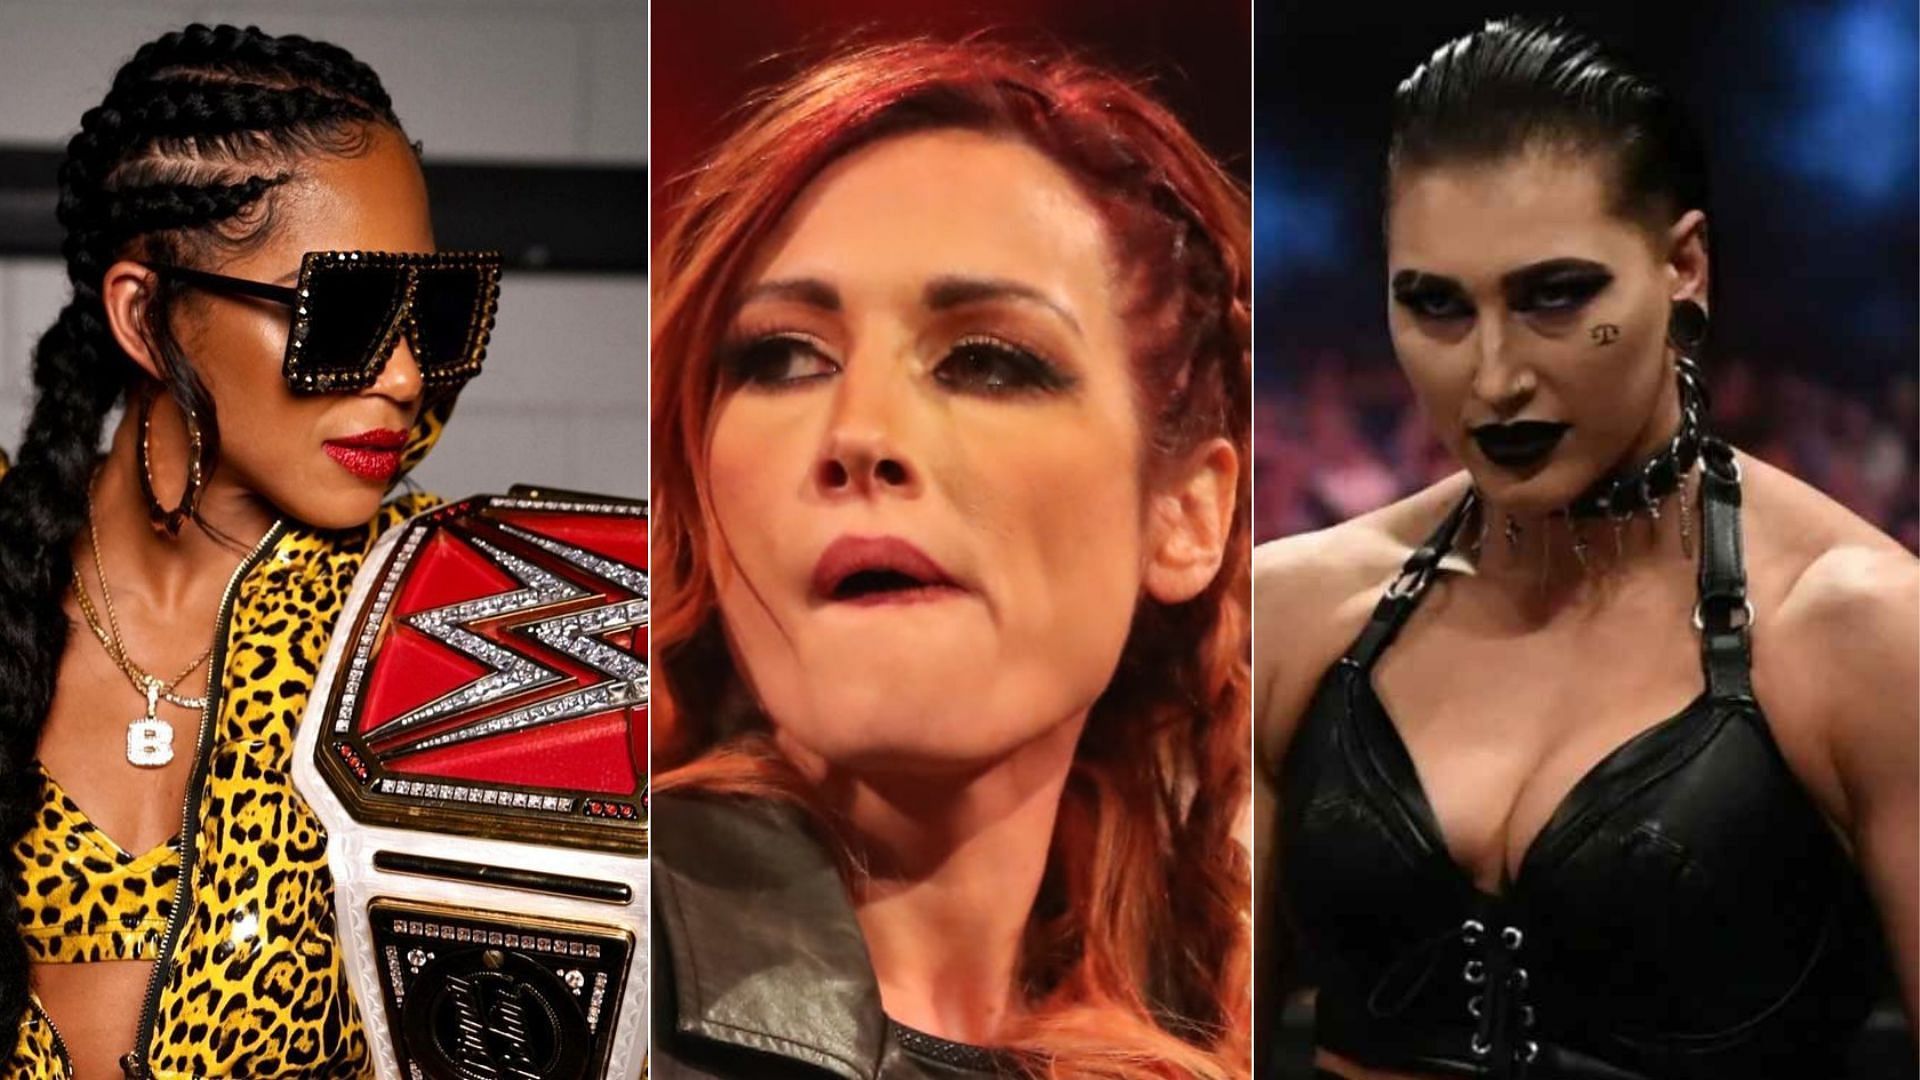 Who is the female face of WWE among these three?